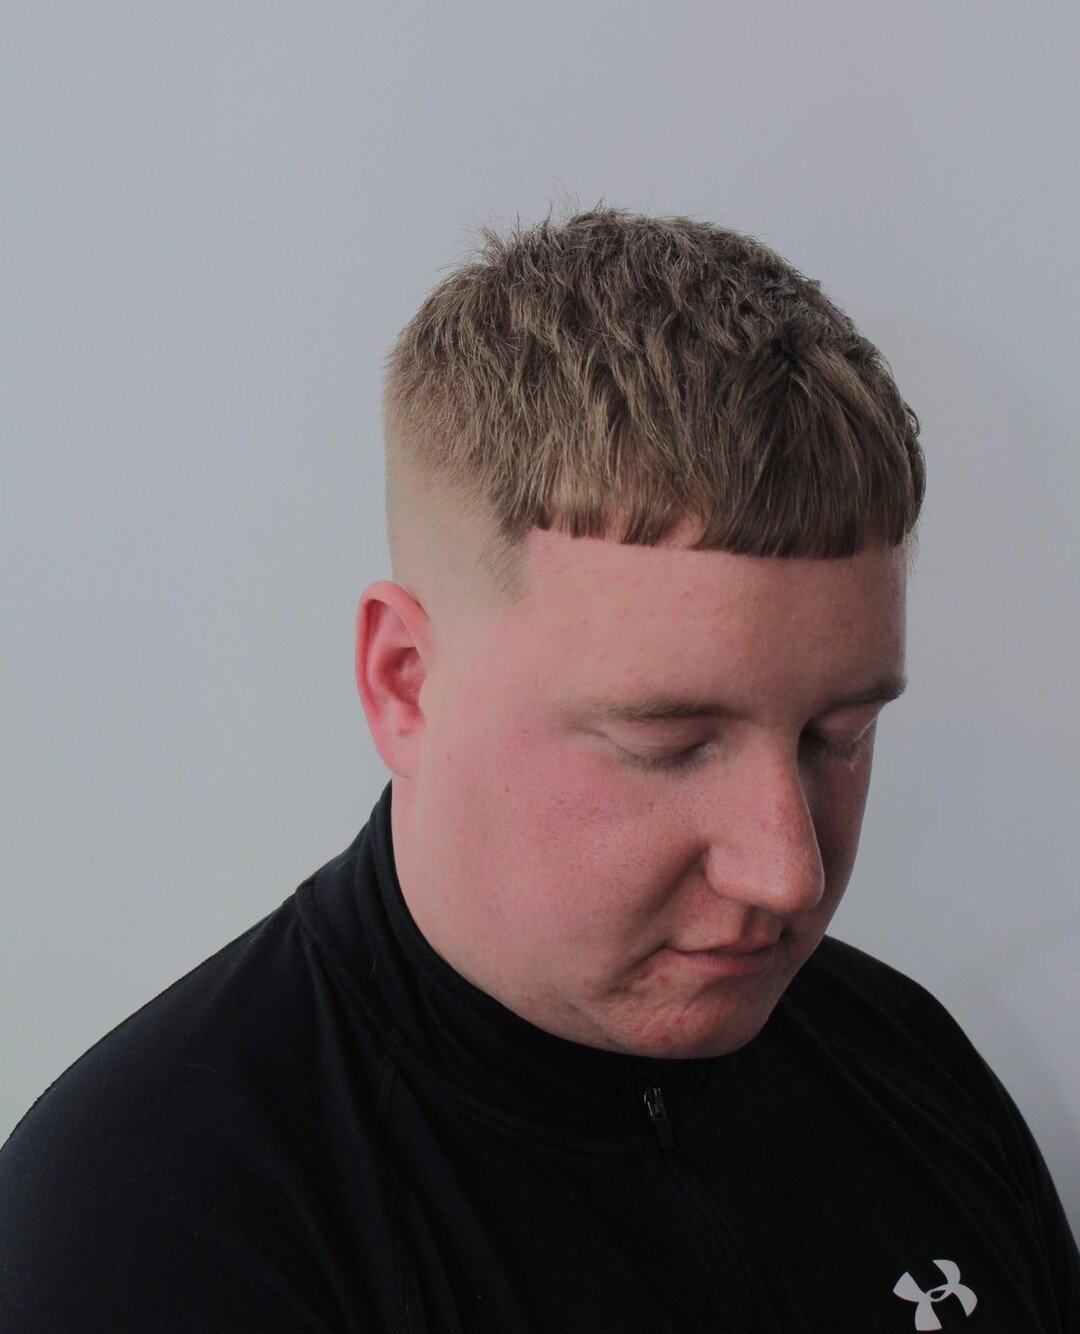 MY PREDICTION, this hairstyle is a U.K inspired #cut ! Just a little over 2 years ago, i noticed how popular this #style was getting! If we could categorise the styles over the years, #Fades ruled over mid to late 90's, #Designs came strong not too l